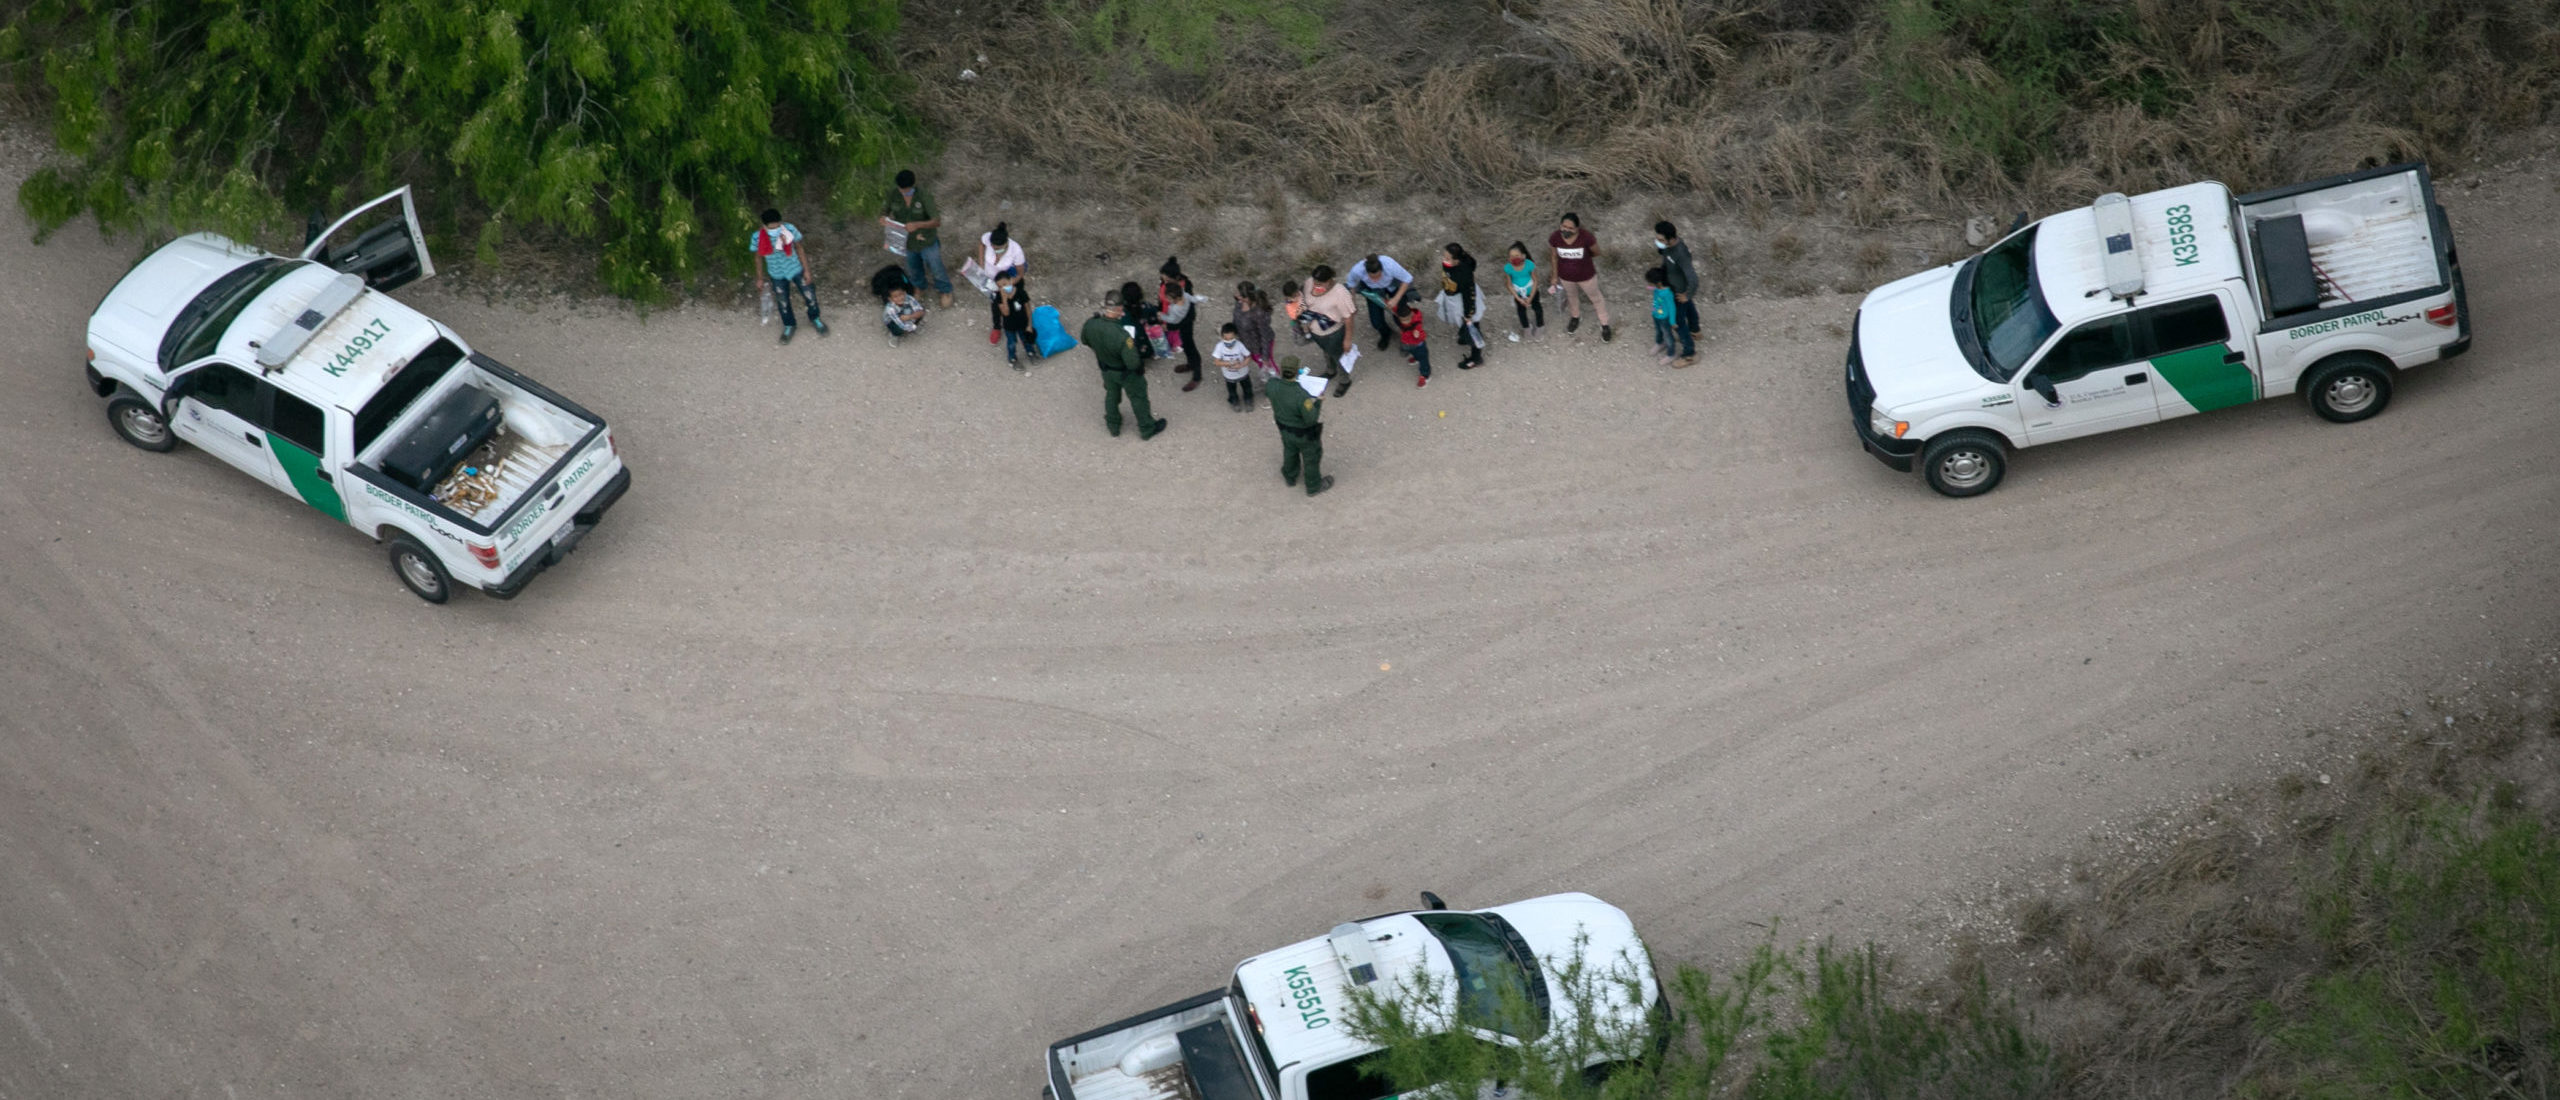 MCALLEN, TEXAS - MARCH 23: U.S. Border Patrol agents take asylum seekers into custody as seen from a Texas Department of Public Safety helicopter near the U.S.-Mexico Border on March 23, 2021 in McAllen, Texas. Texas DPS troopers are taking part in Operation Lone Star in supporting U.S. Border Patrol agents to "deny Mexican Cartels and other smugglers the ability to move drugs and people into Texas." (Photo by John Moore/Getty Images)